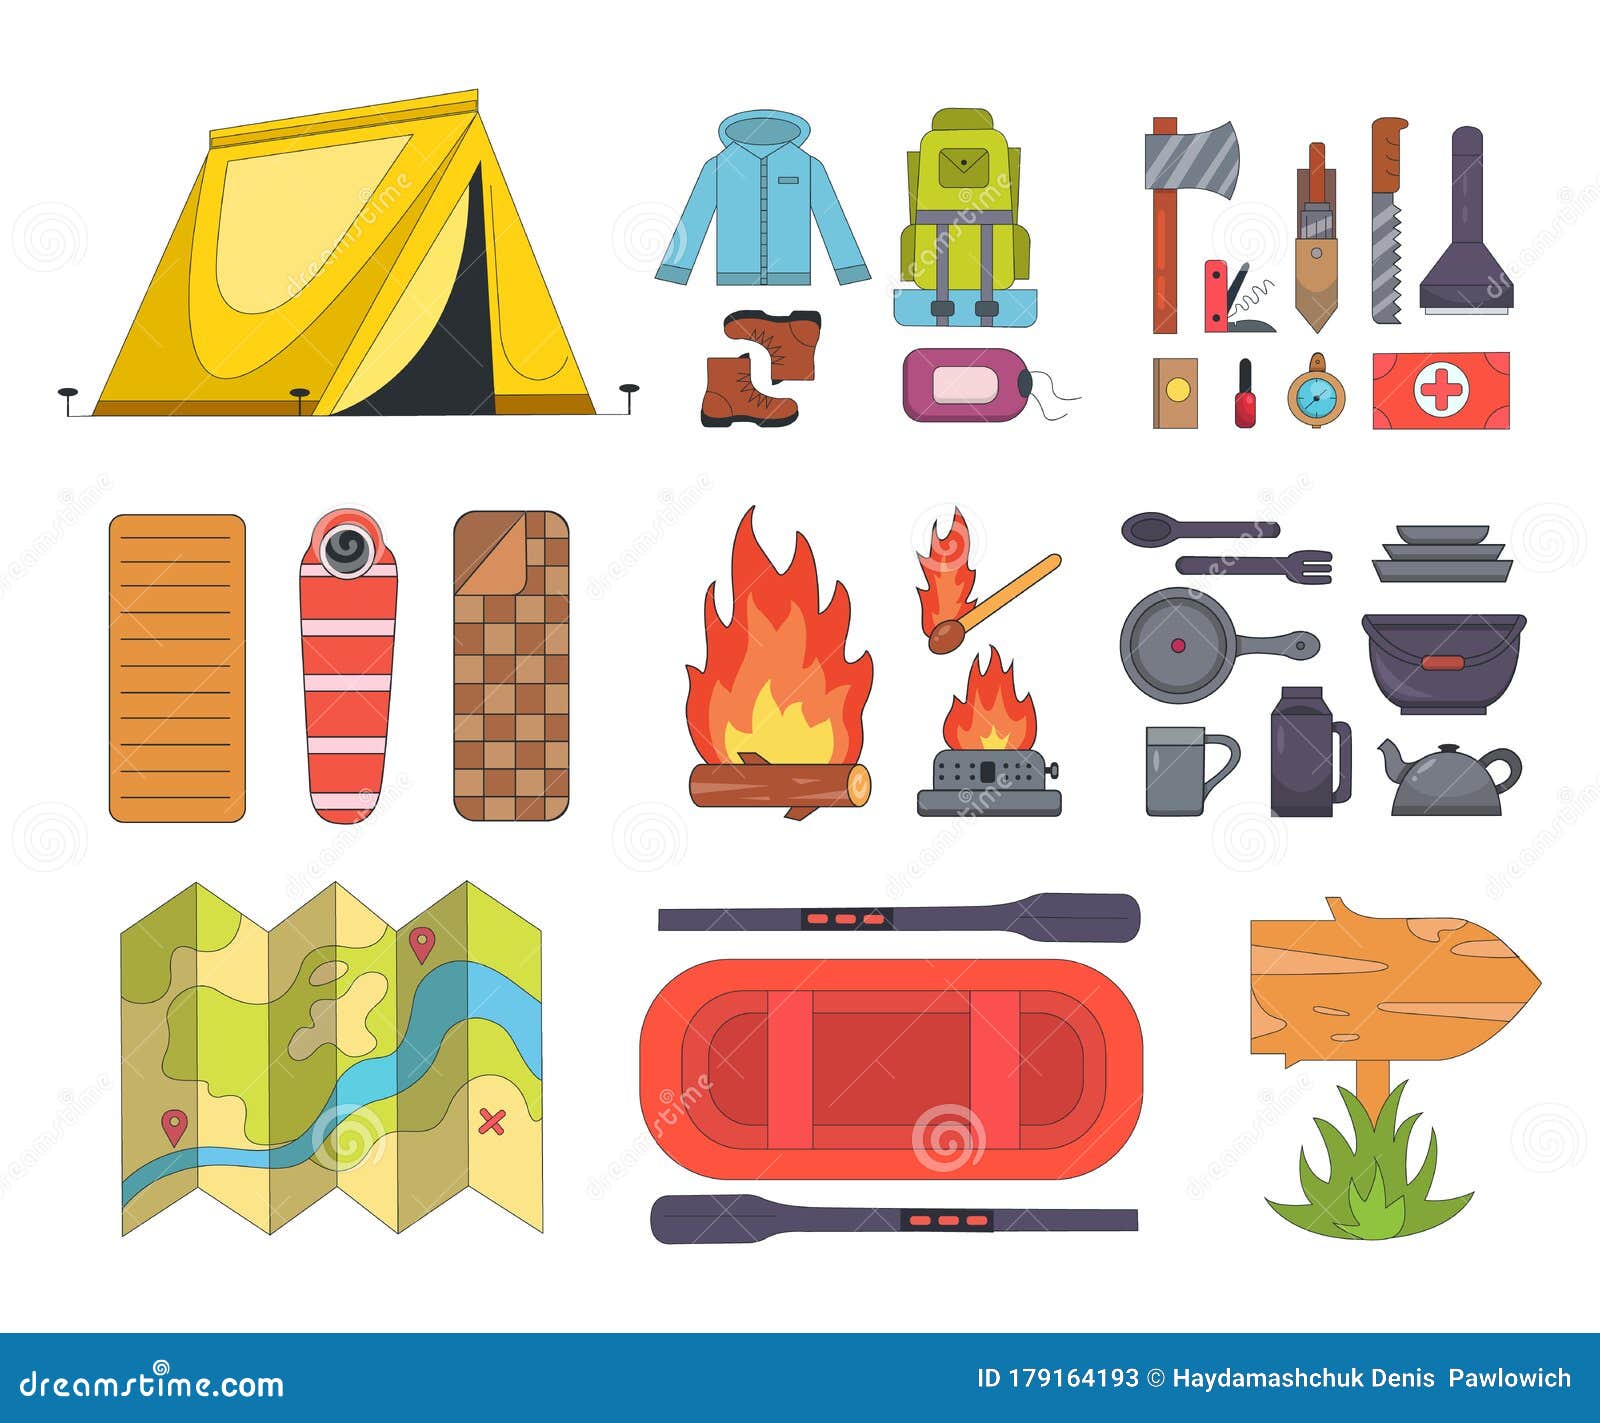 https://thumbs.dreamstime.com/z/set-camping-equipment-icons-cartoon-style-supplies-tools-hiking-expedition-bag-map-tent-campfire-tourist-camp-equip-179164193.jpg